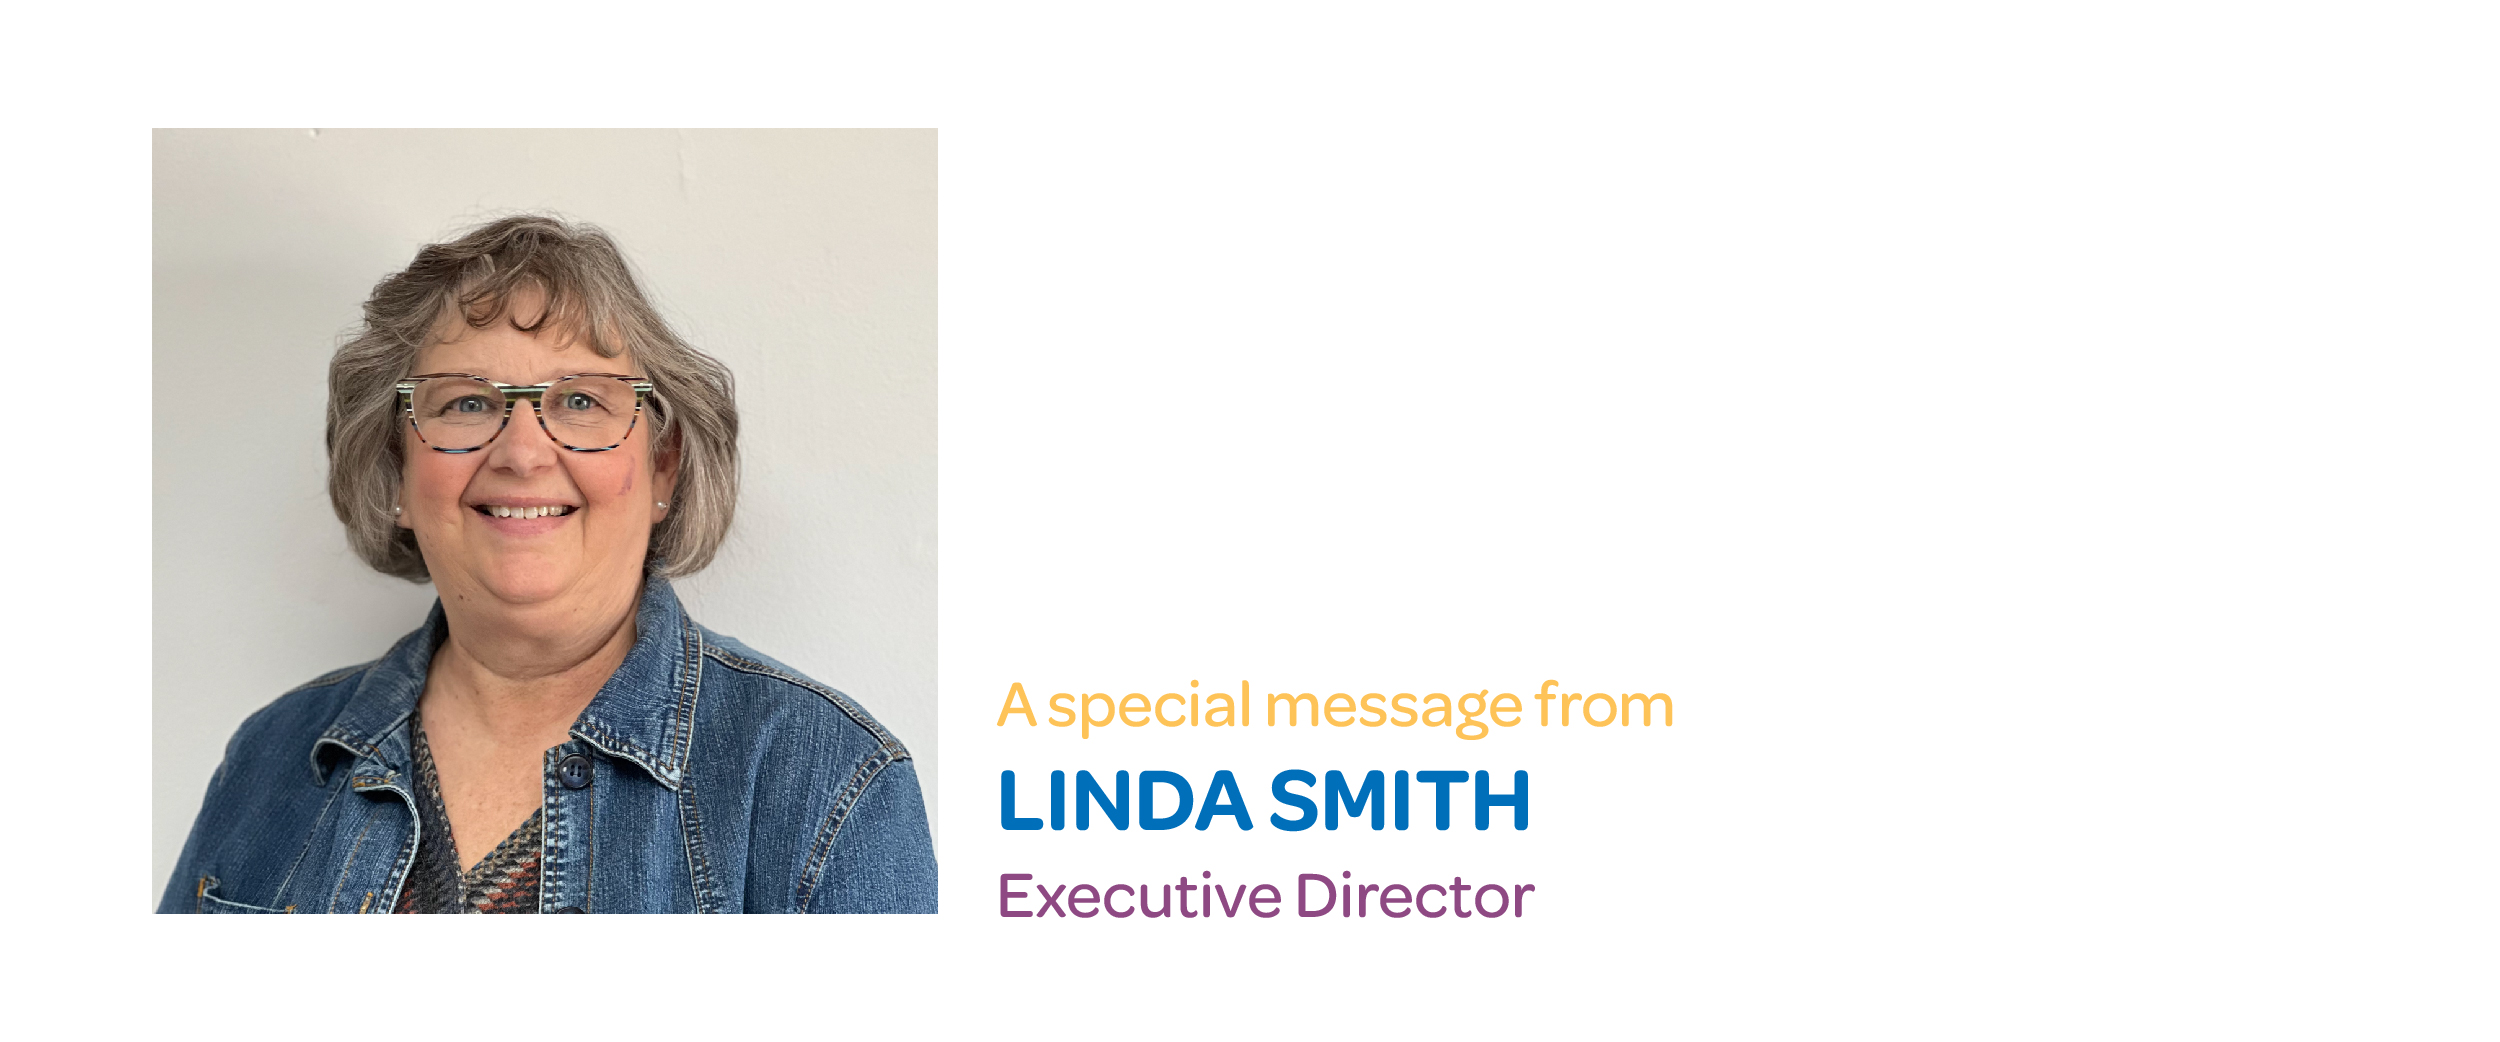 A special message from Linda Smith, Executive Director